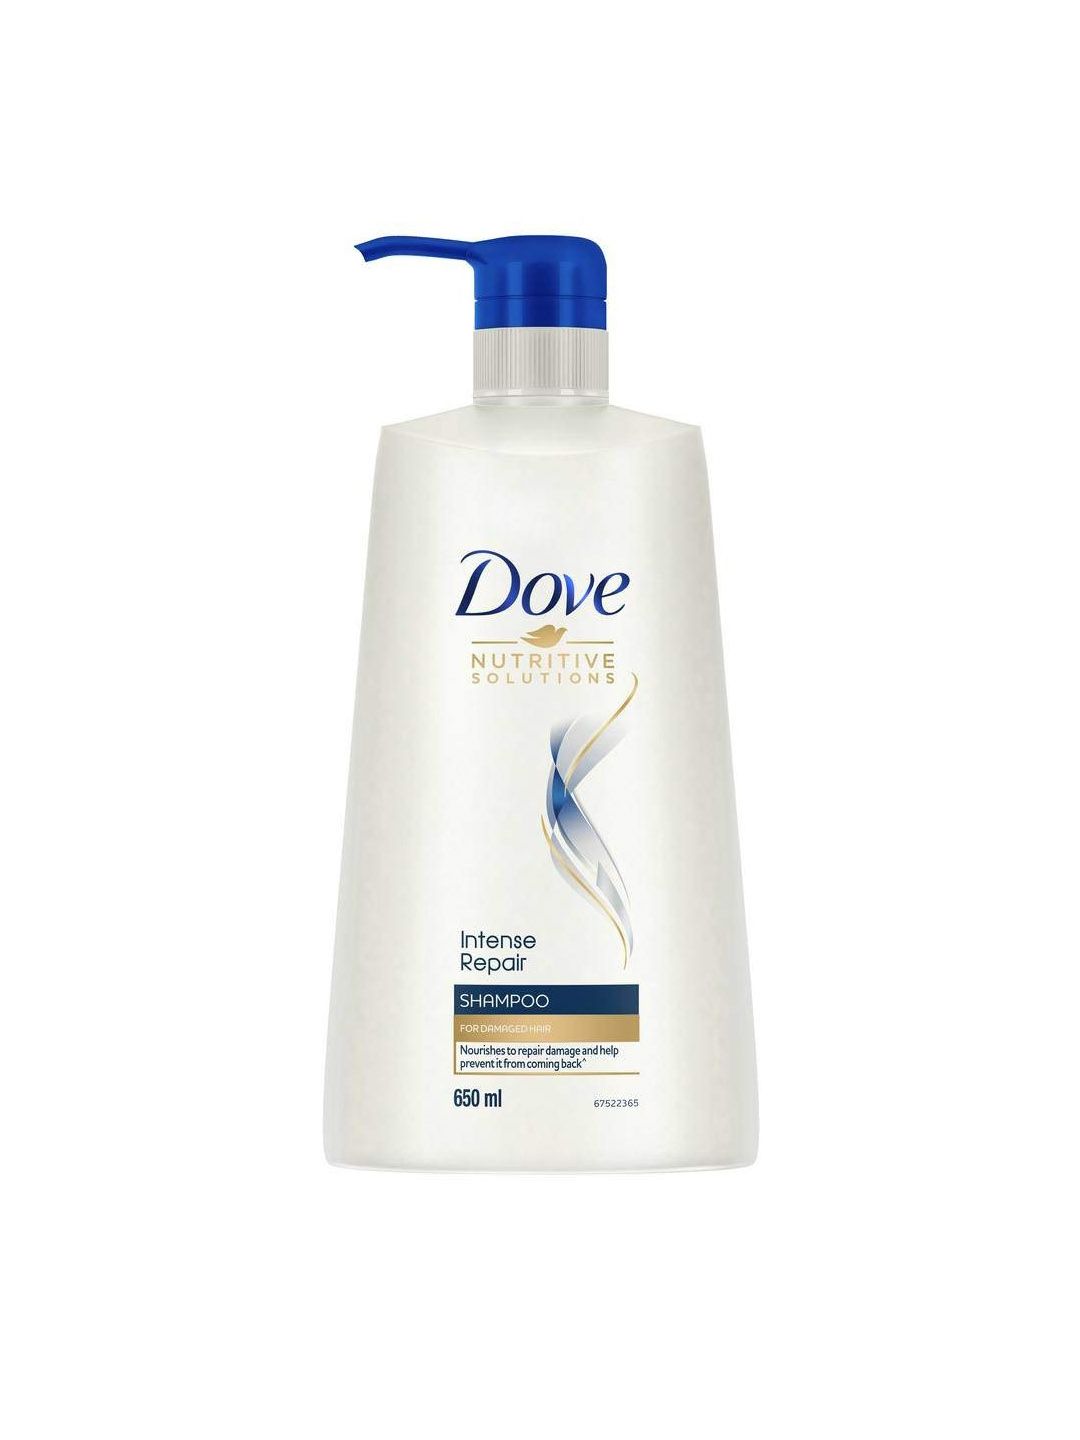 Dove Hair Therapy Intense Repair Shampoo with Glycerin 650 ml Price in India